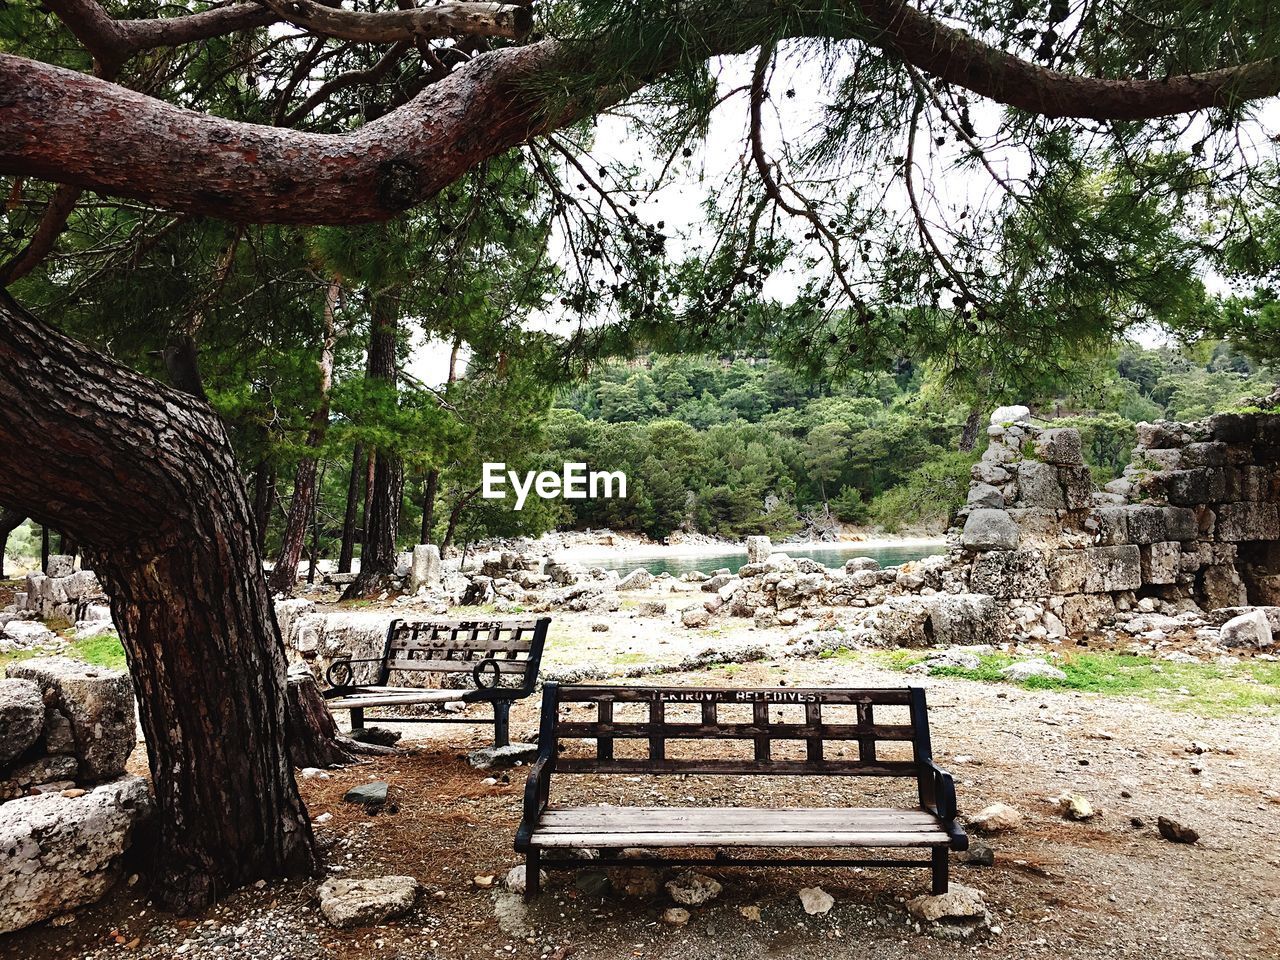 View of empty benches in forest